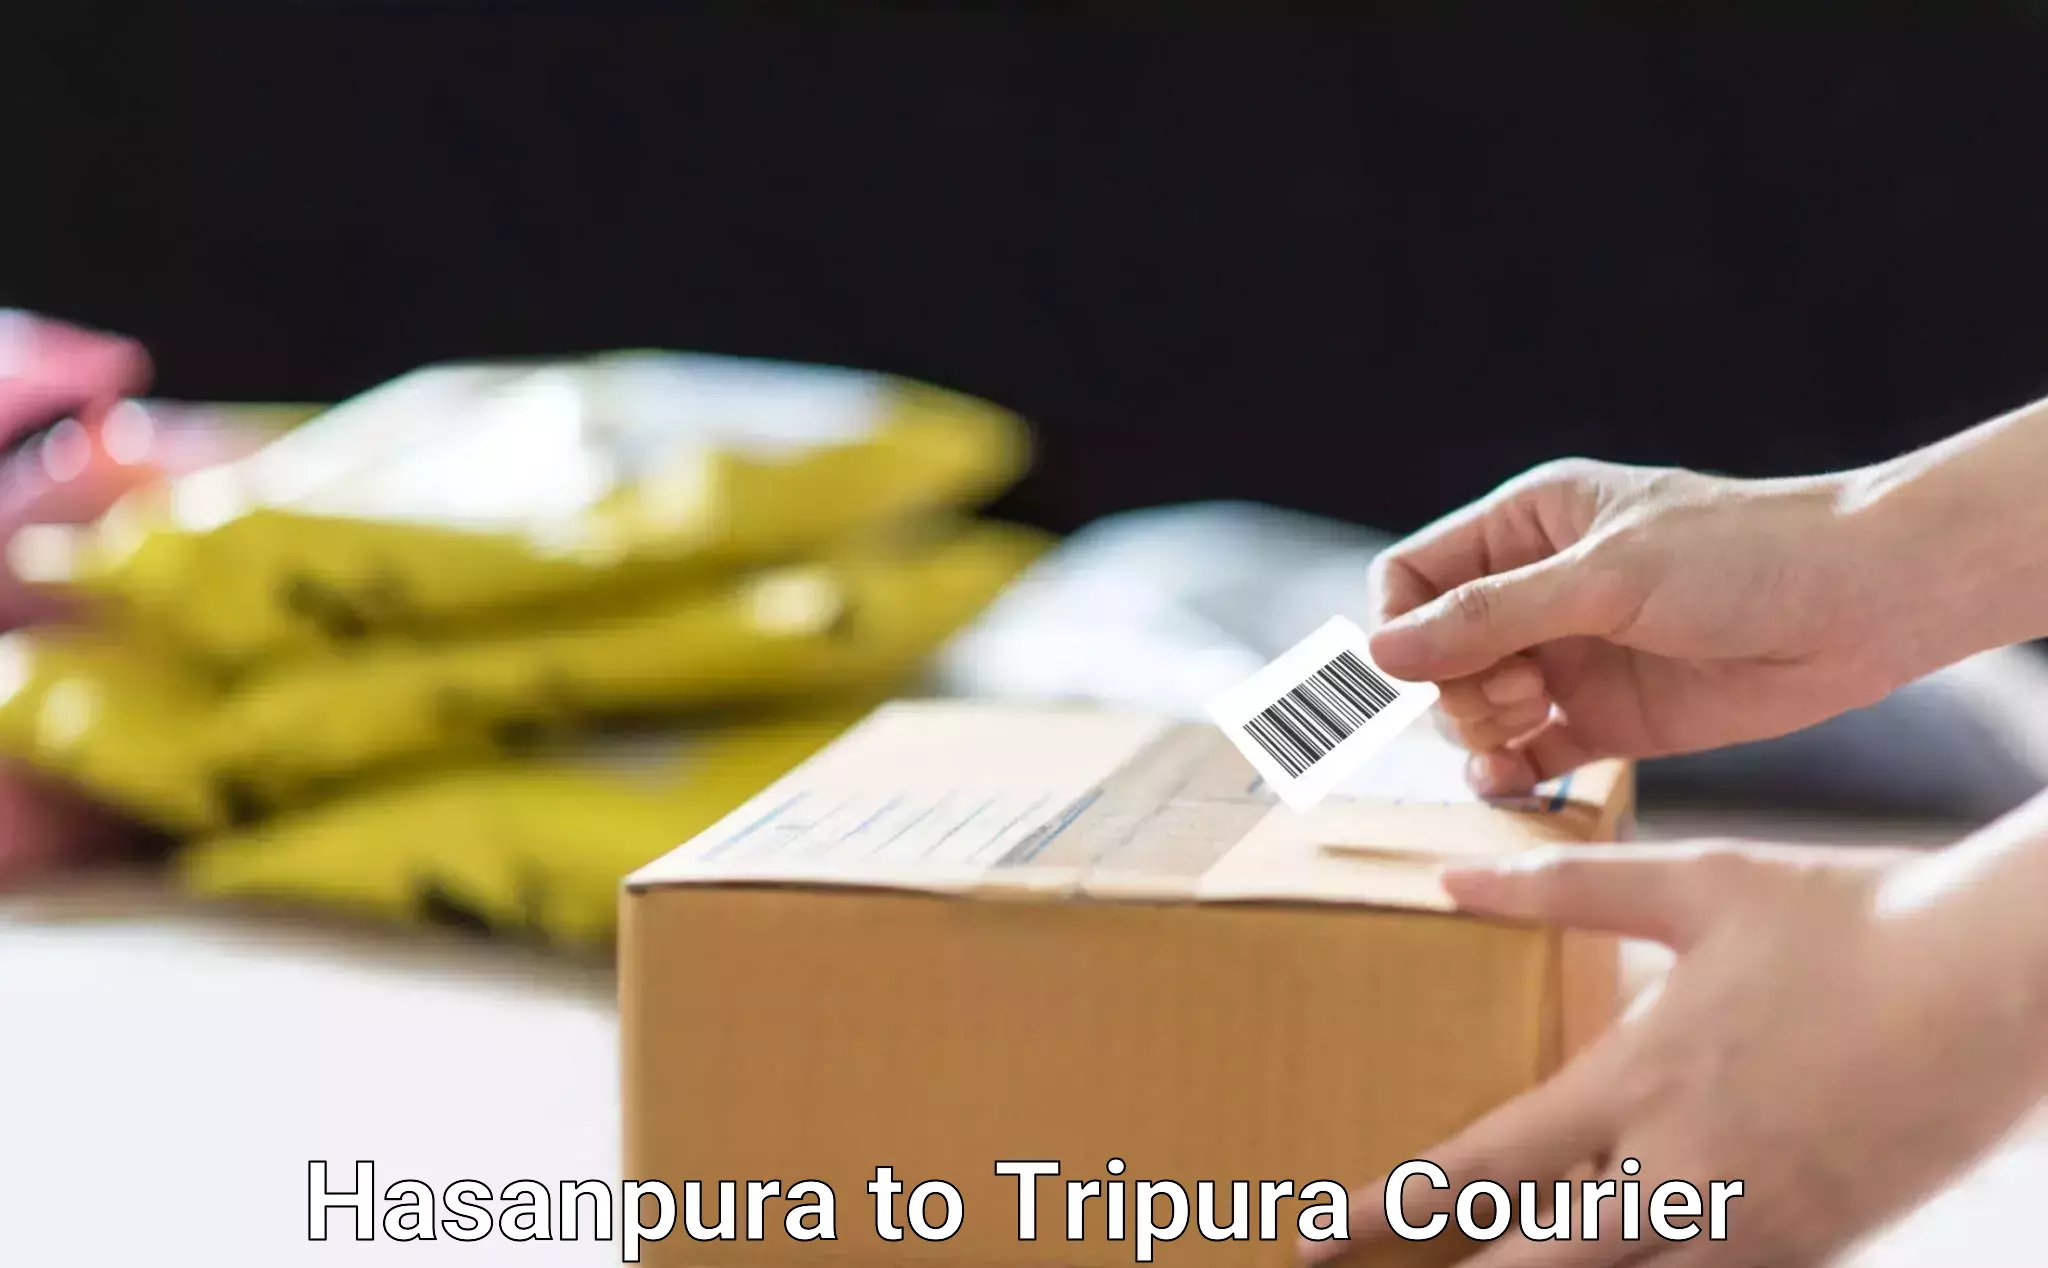 Quality relocation services Hasanpura to Tripura